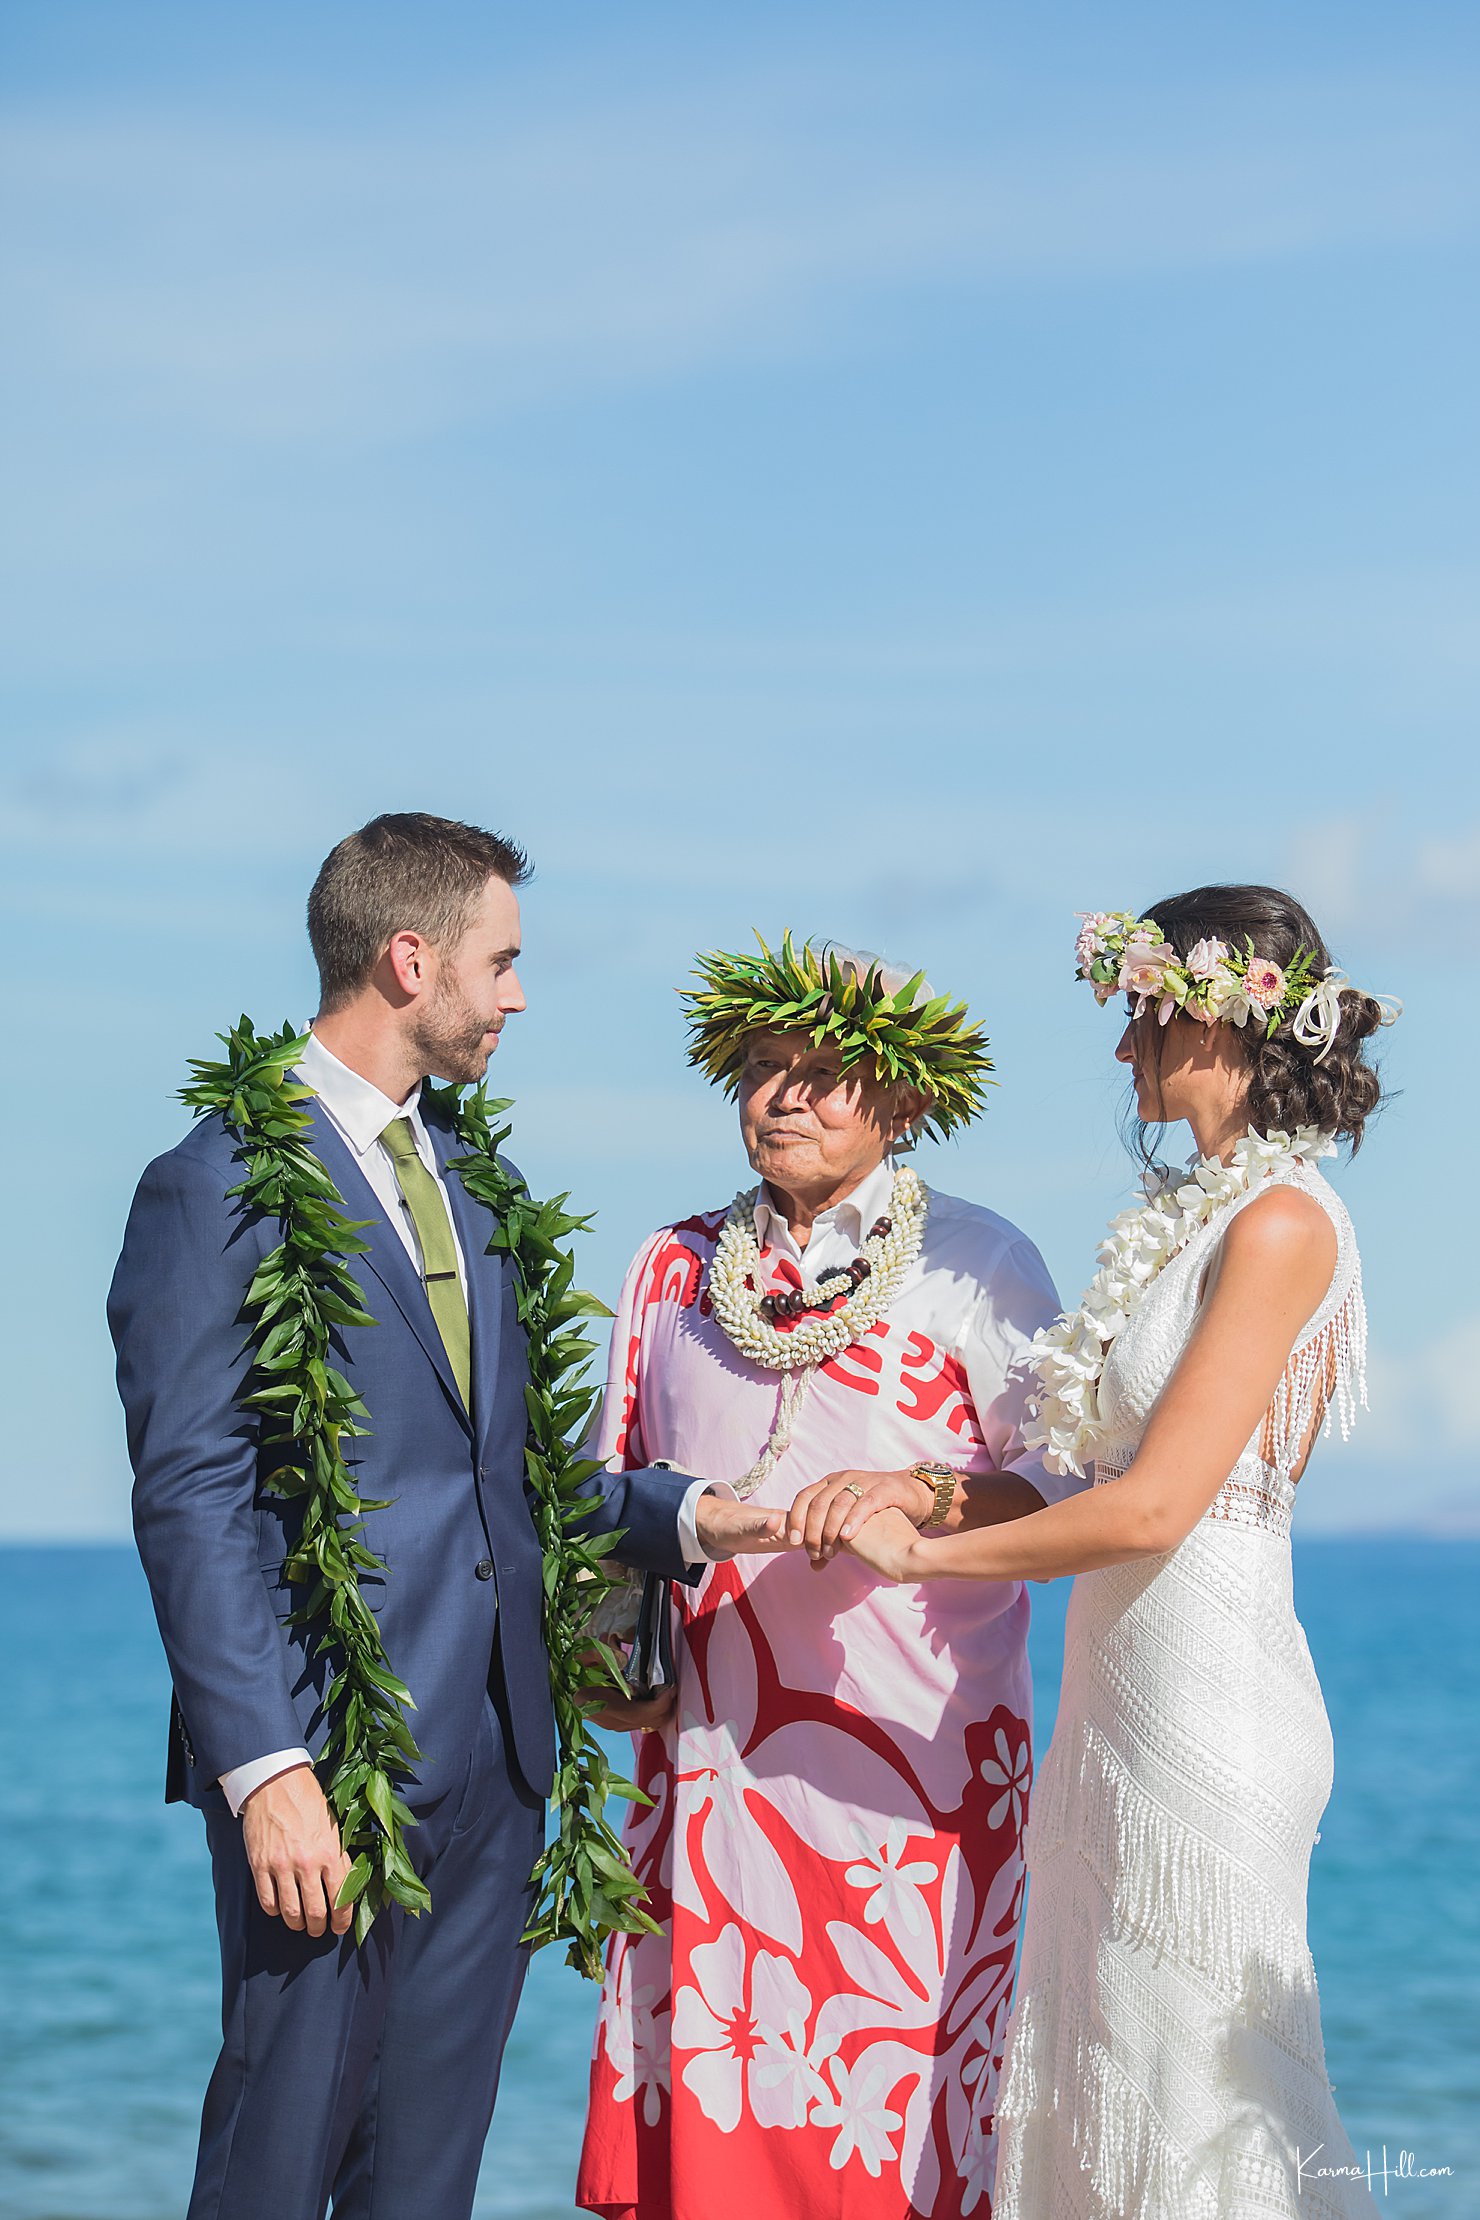 Officiant for Destination Wedding in Maui